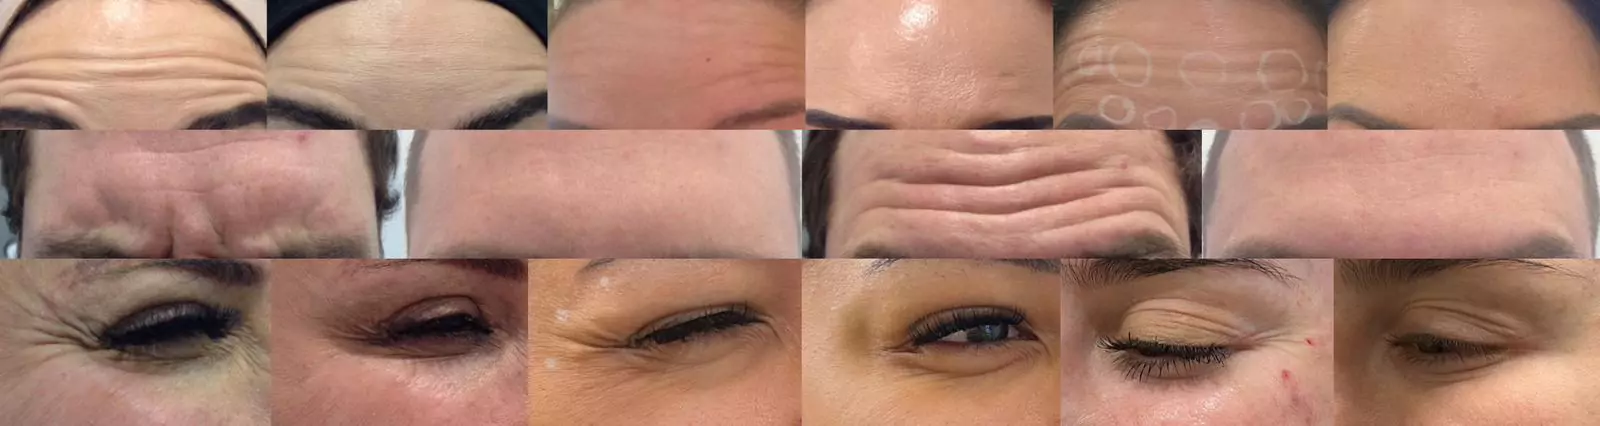 before and after images of anti wrinkle treatments